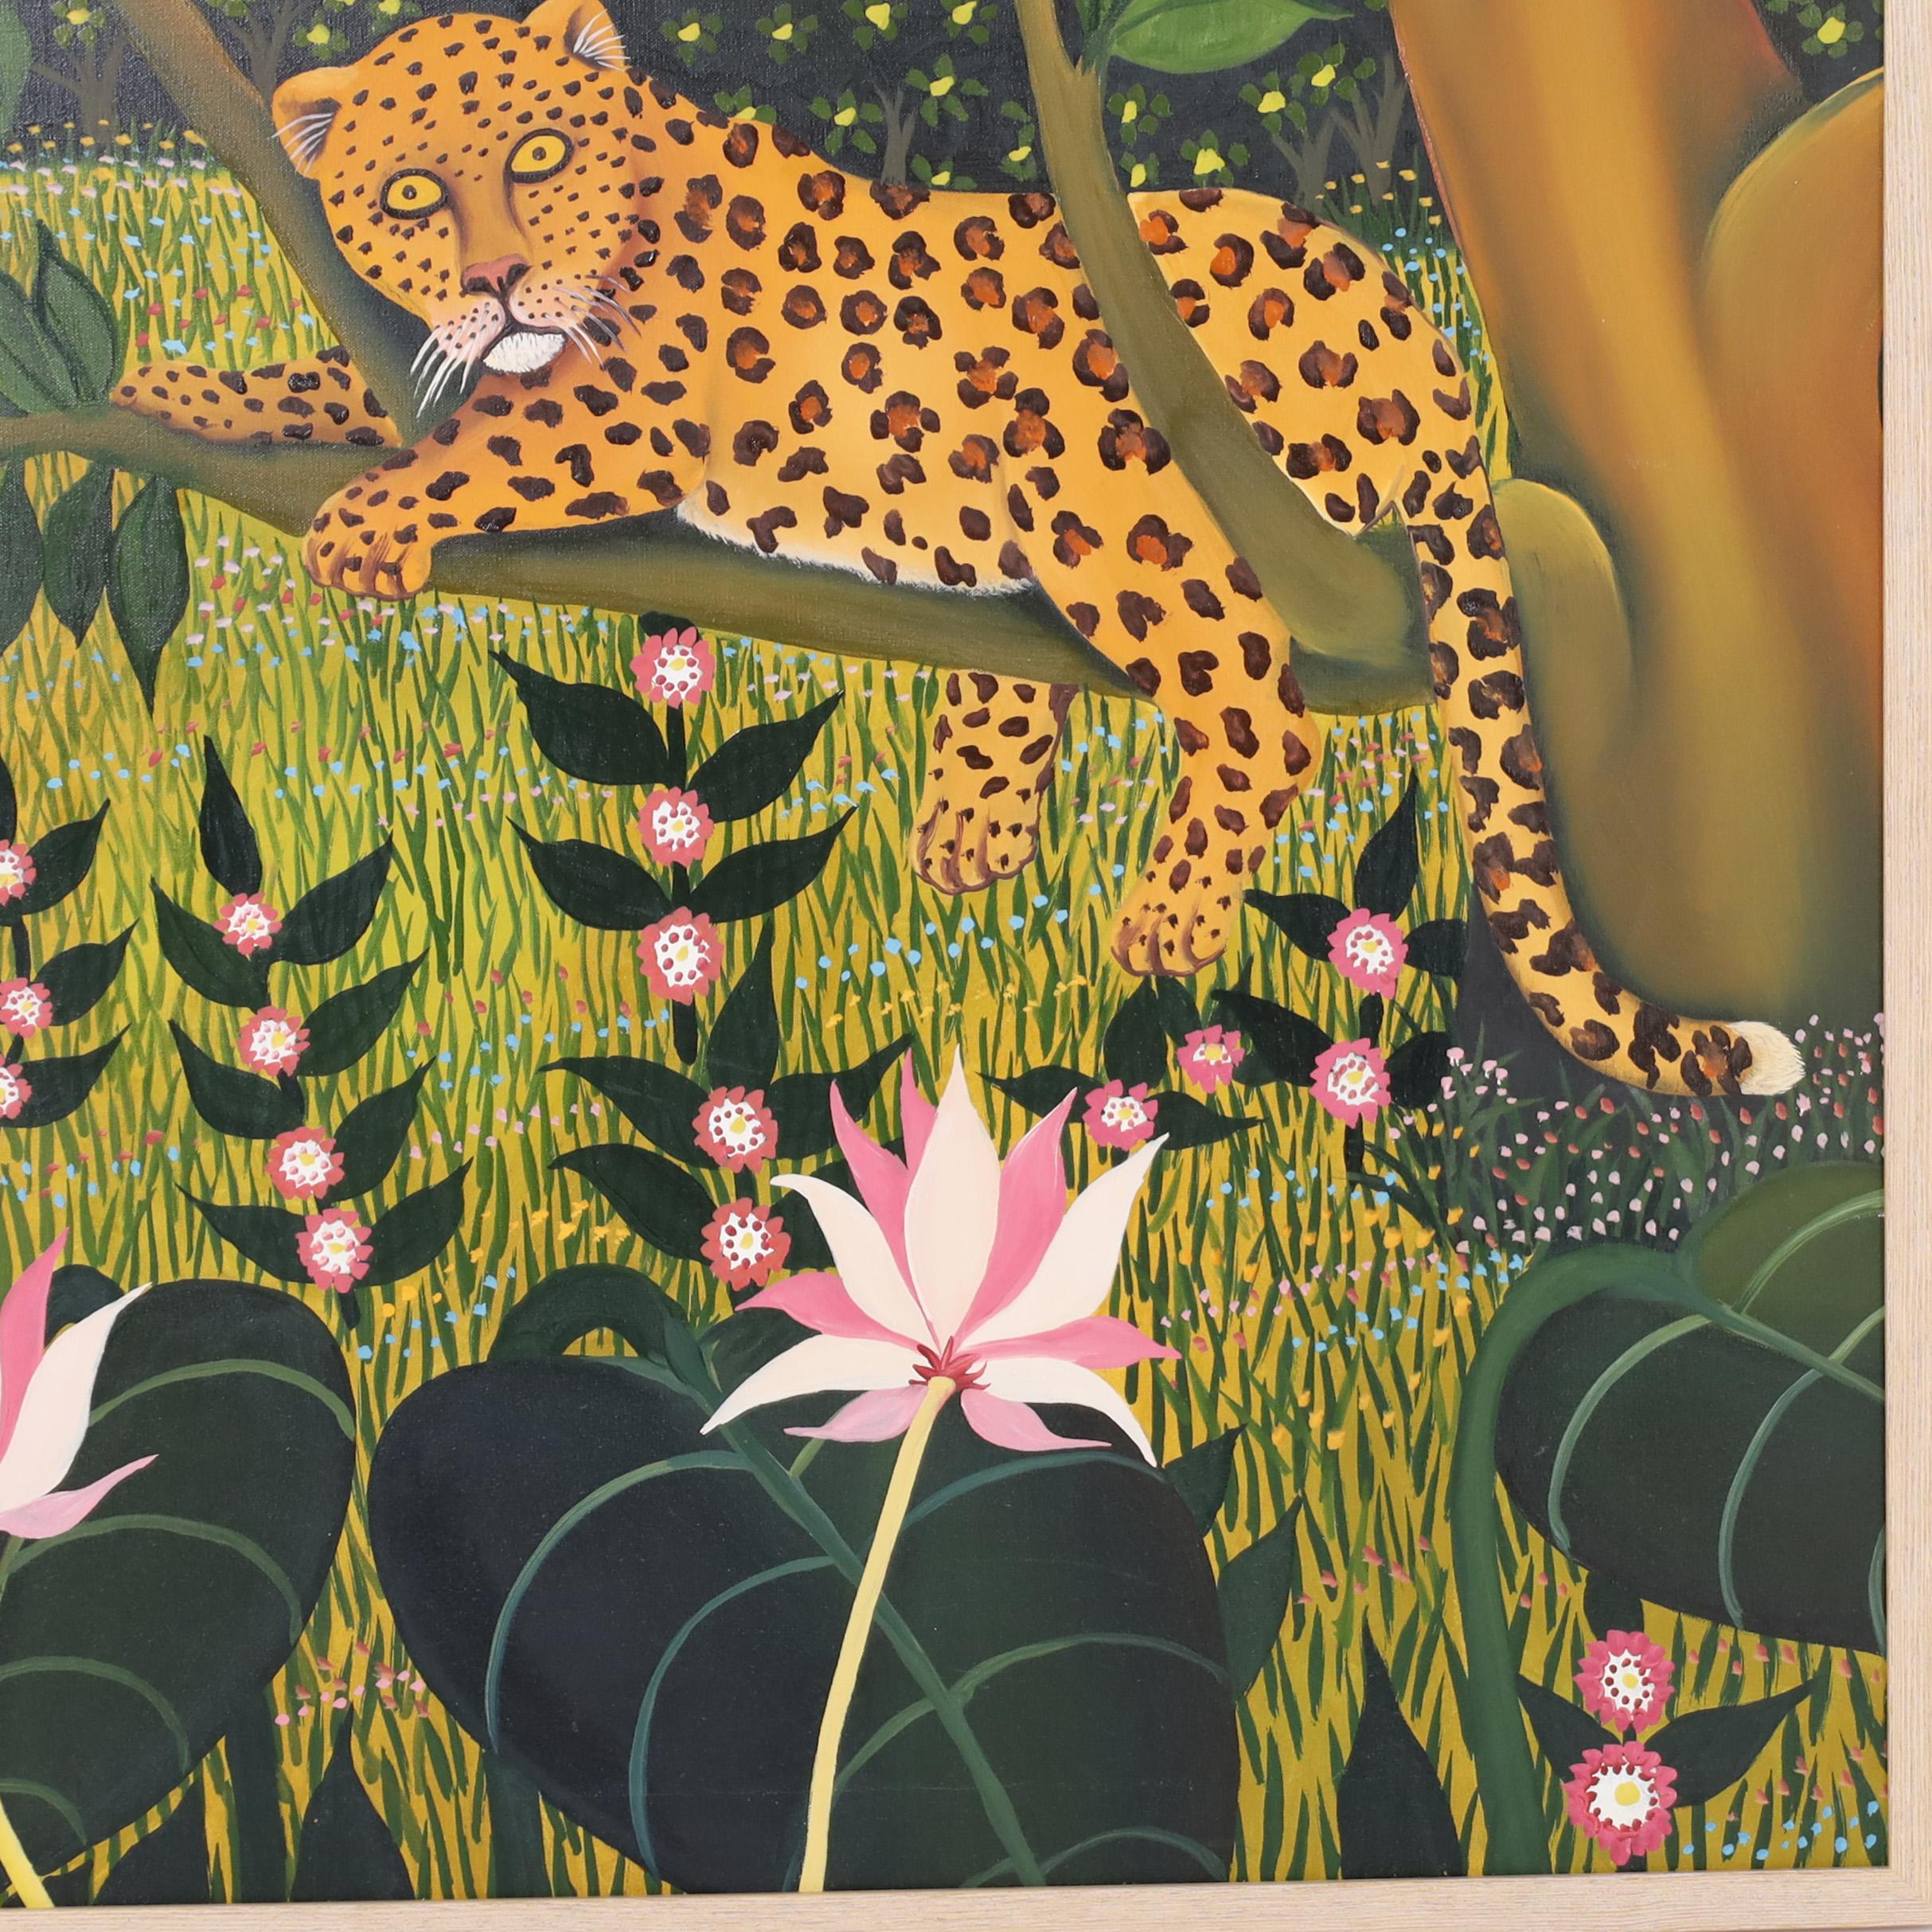 Folk Art Vintage Painting on Canvas of a Leopard and Parrot in a Jungle Setting For Sale